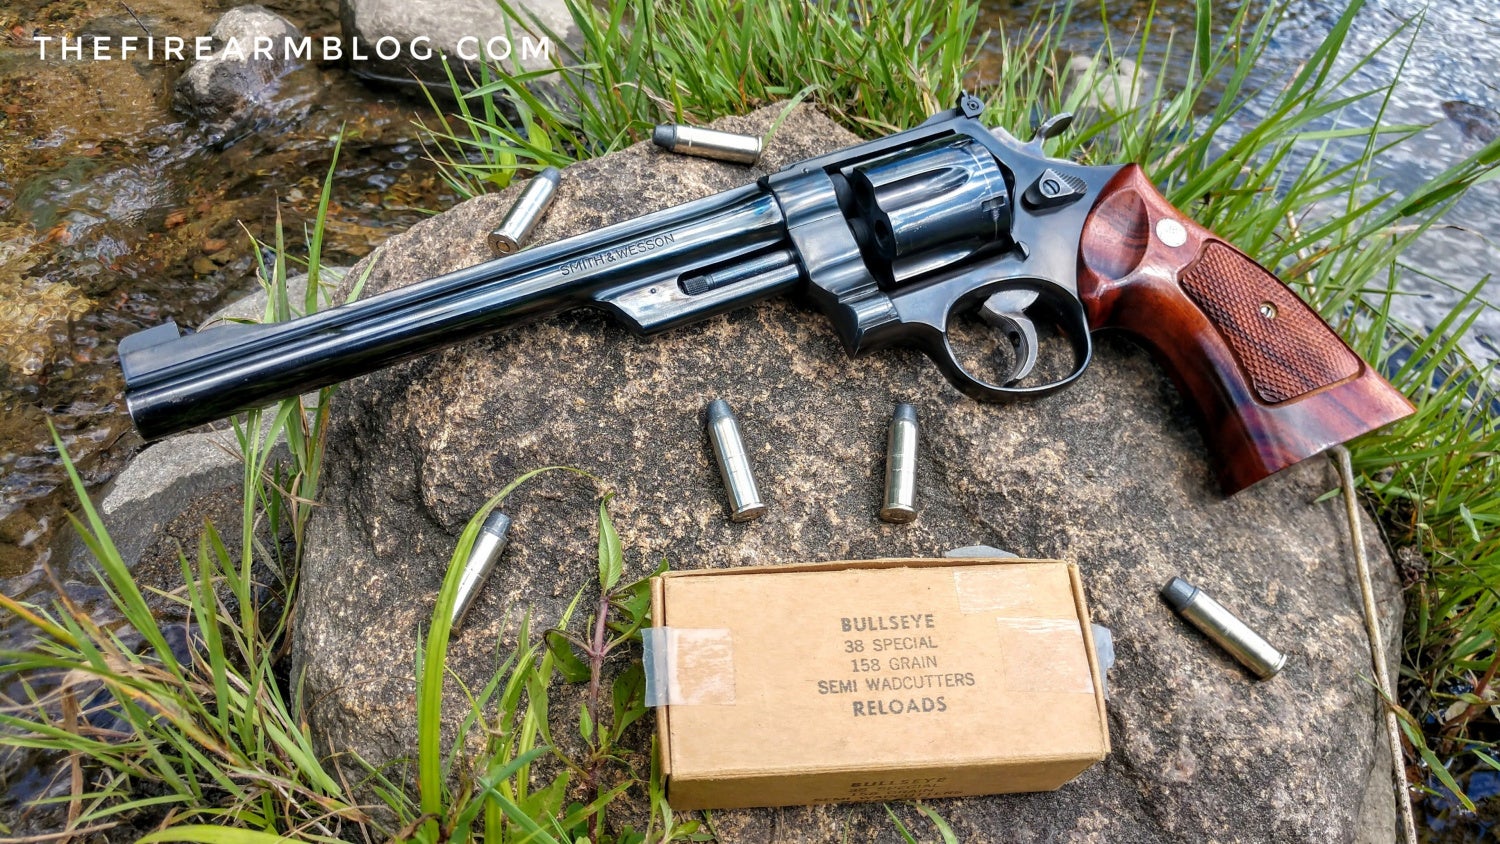 Smith & Wesson Classic